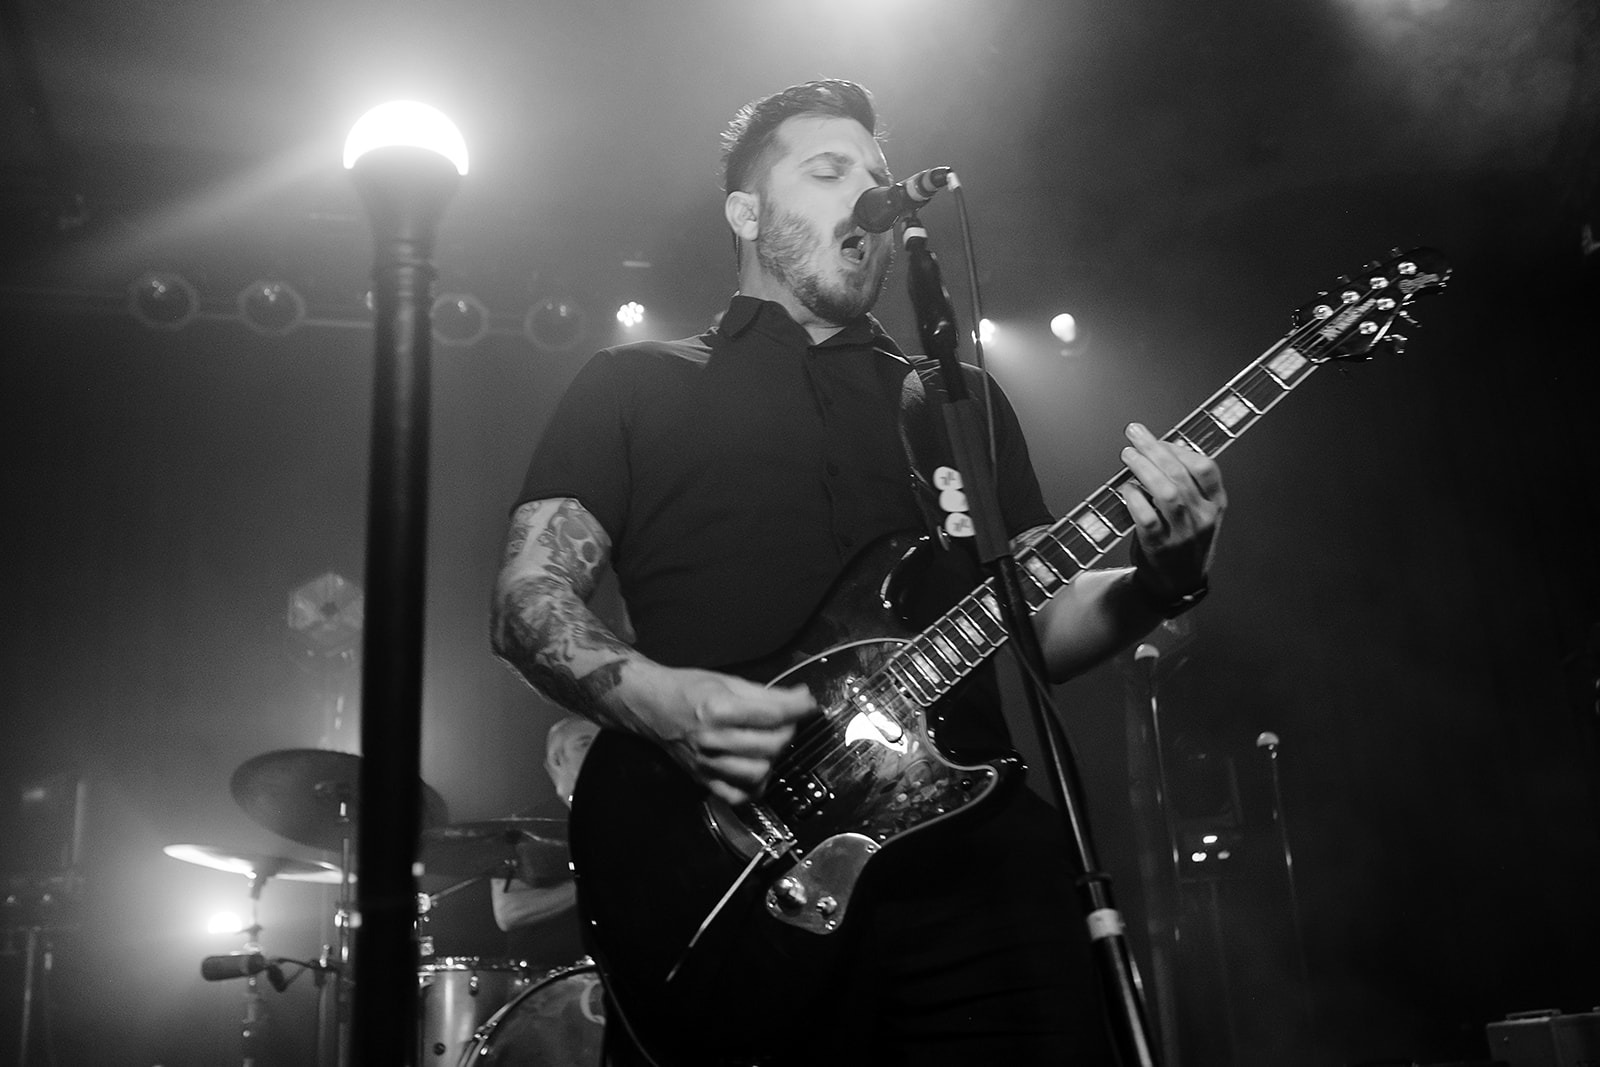 Dustin Kensrue of Thrice preforms at the showbox during their 20th Anniversary of Artists In The Ambulance